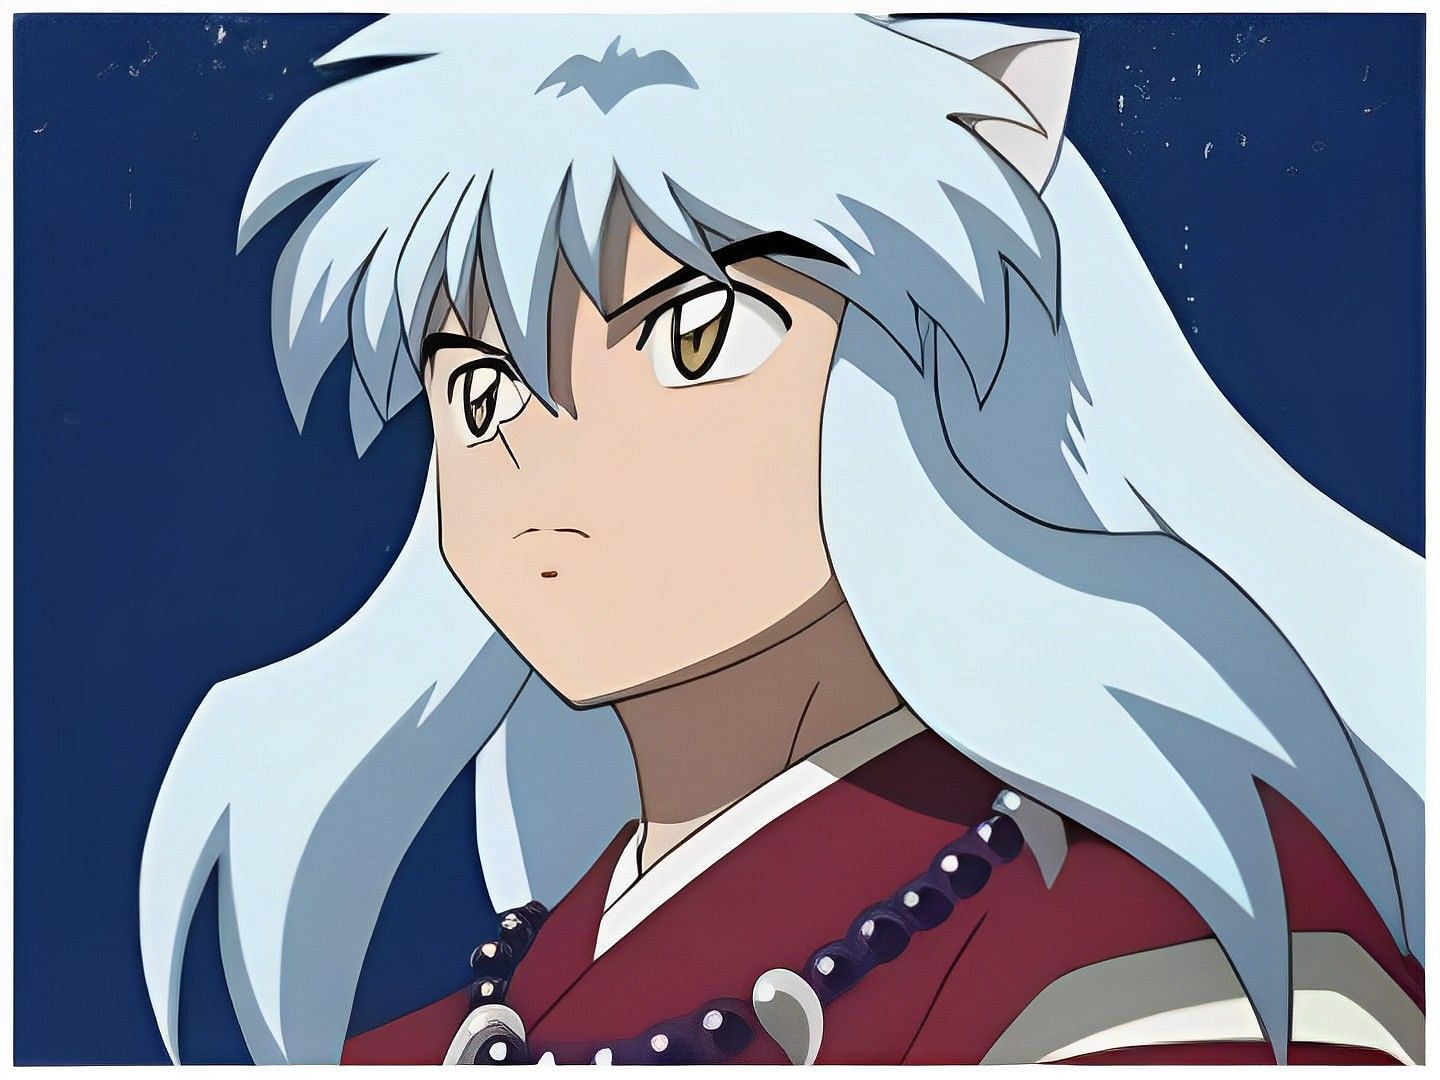 Kyoto Animation, founded in 1981, produced 33 episodes of the anime Inuyasha, which premiered in 2000. (Image via Kyoto Animation)